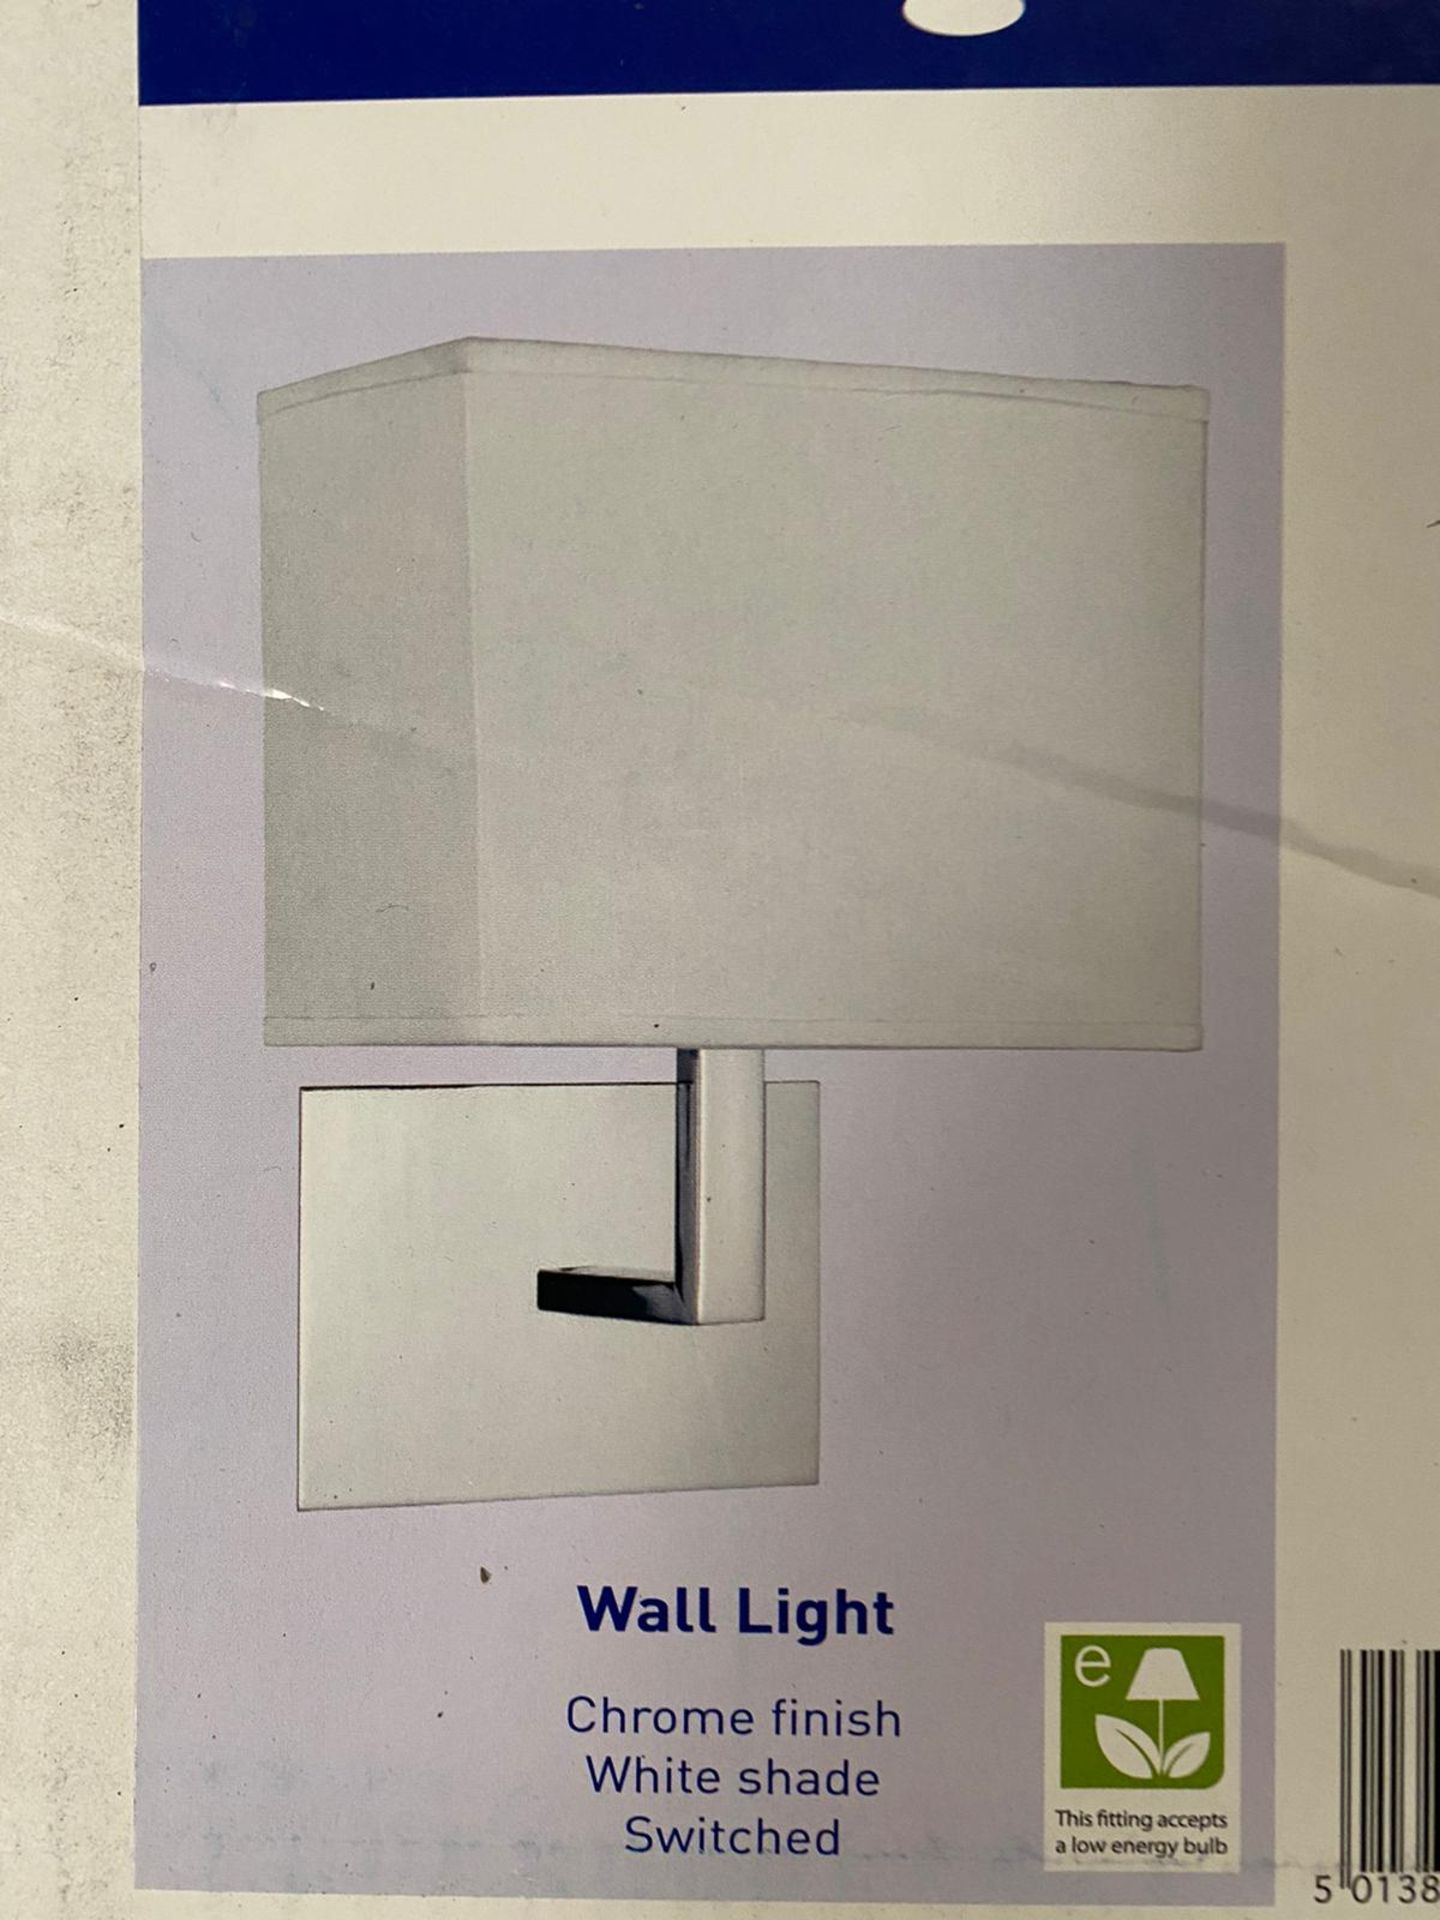 1 x Searchlight Wall light in chrome - Ref: 5519CC - New and Boxed - RRP: £60 - Image 4 of 4